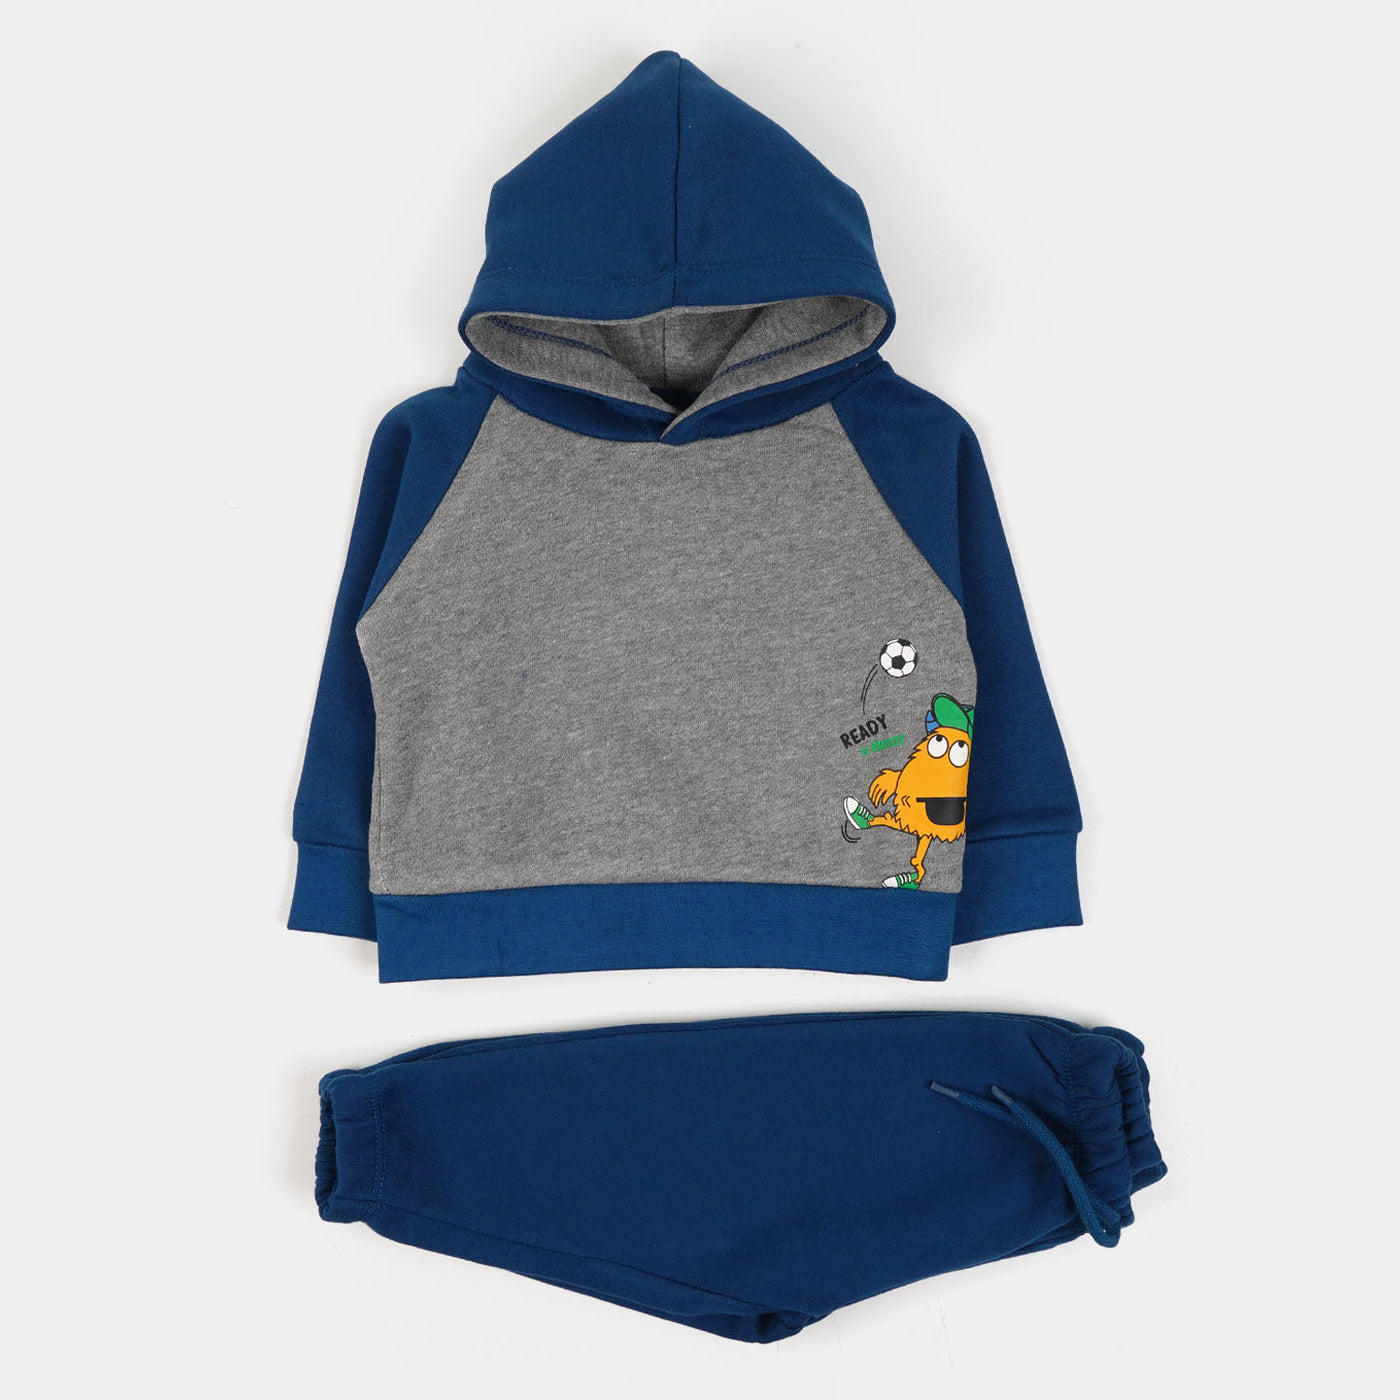 Infant Boys Knitted Suit Ready To Shoot - Grey&Navy